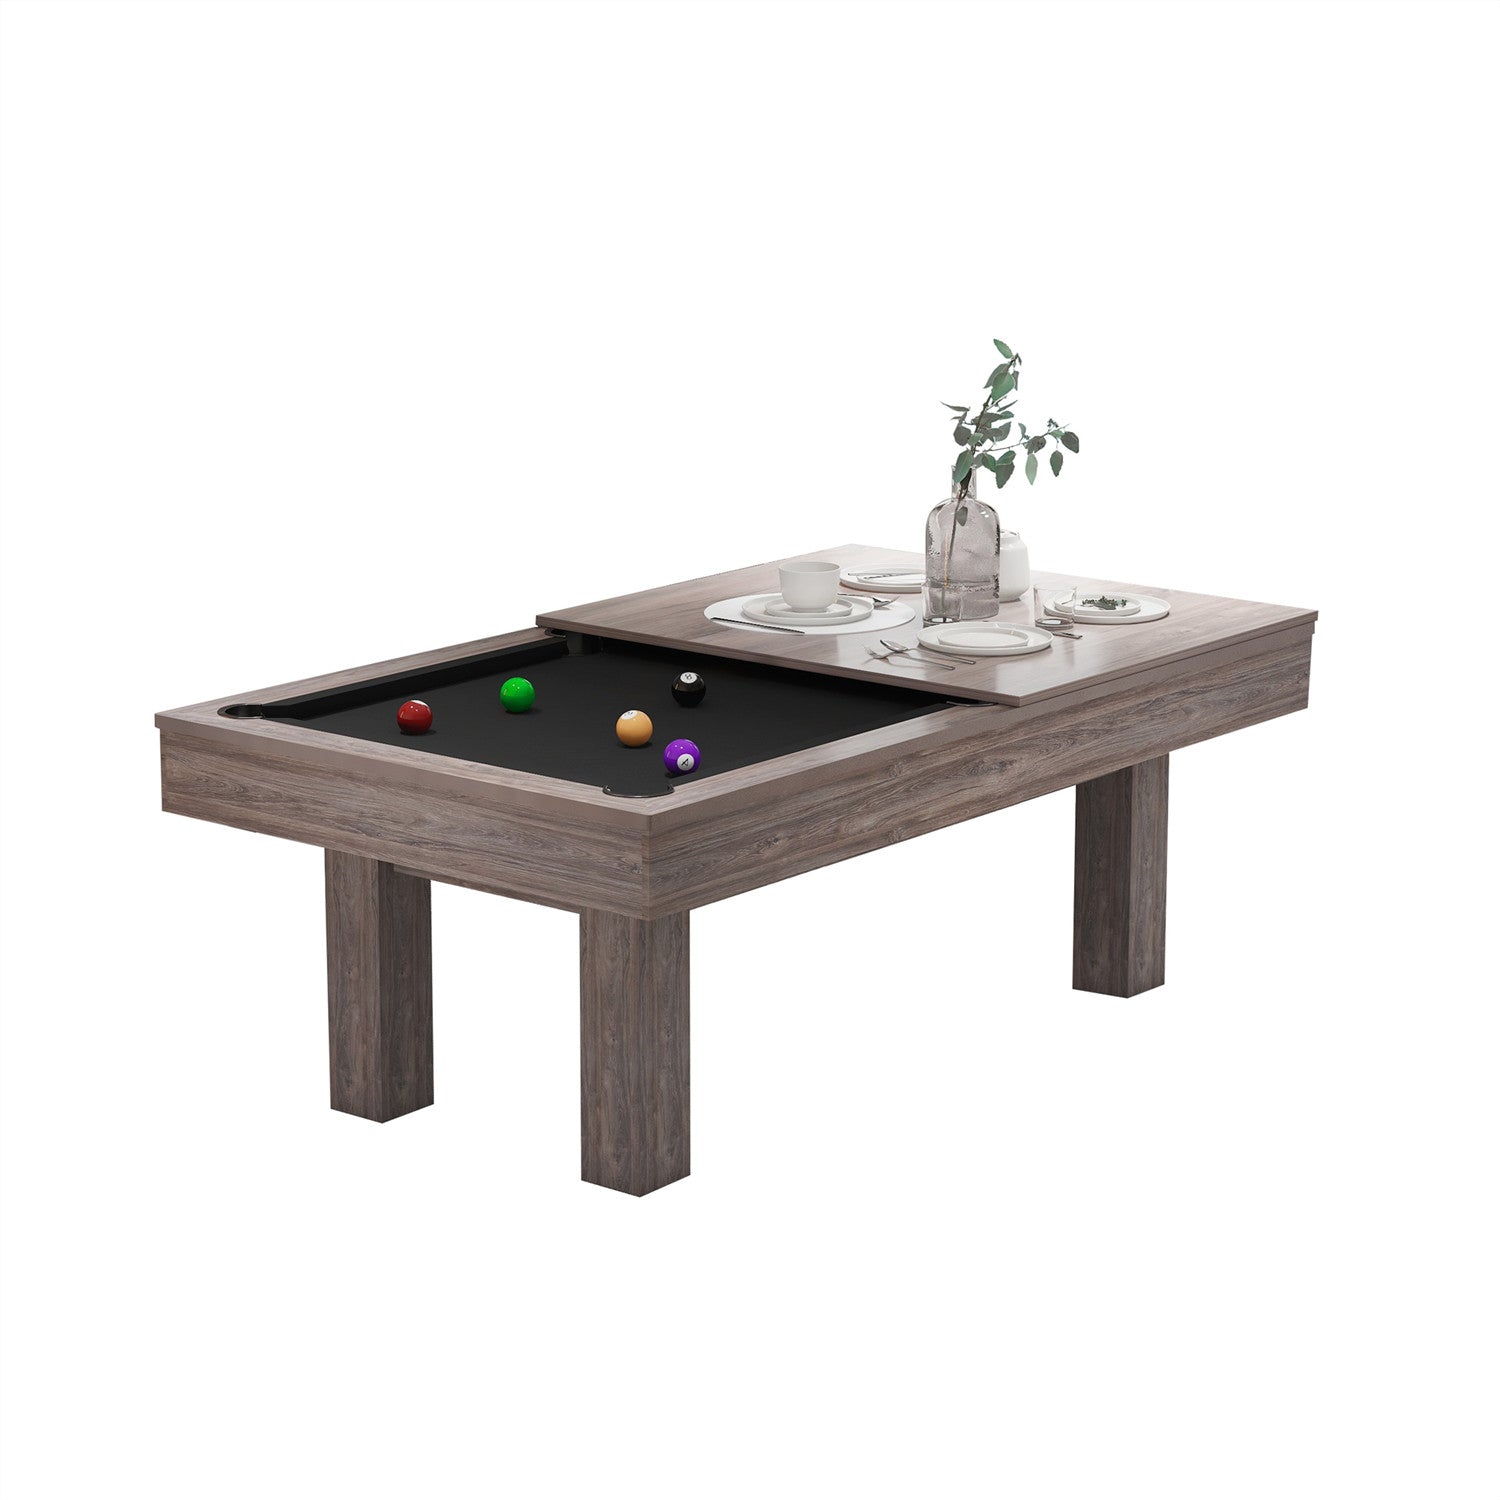 Sidra Dining Pool Table - Slate 3IN1 8FT